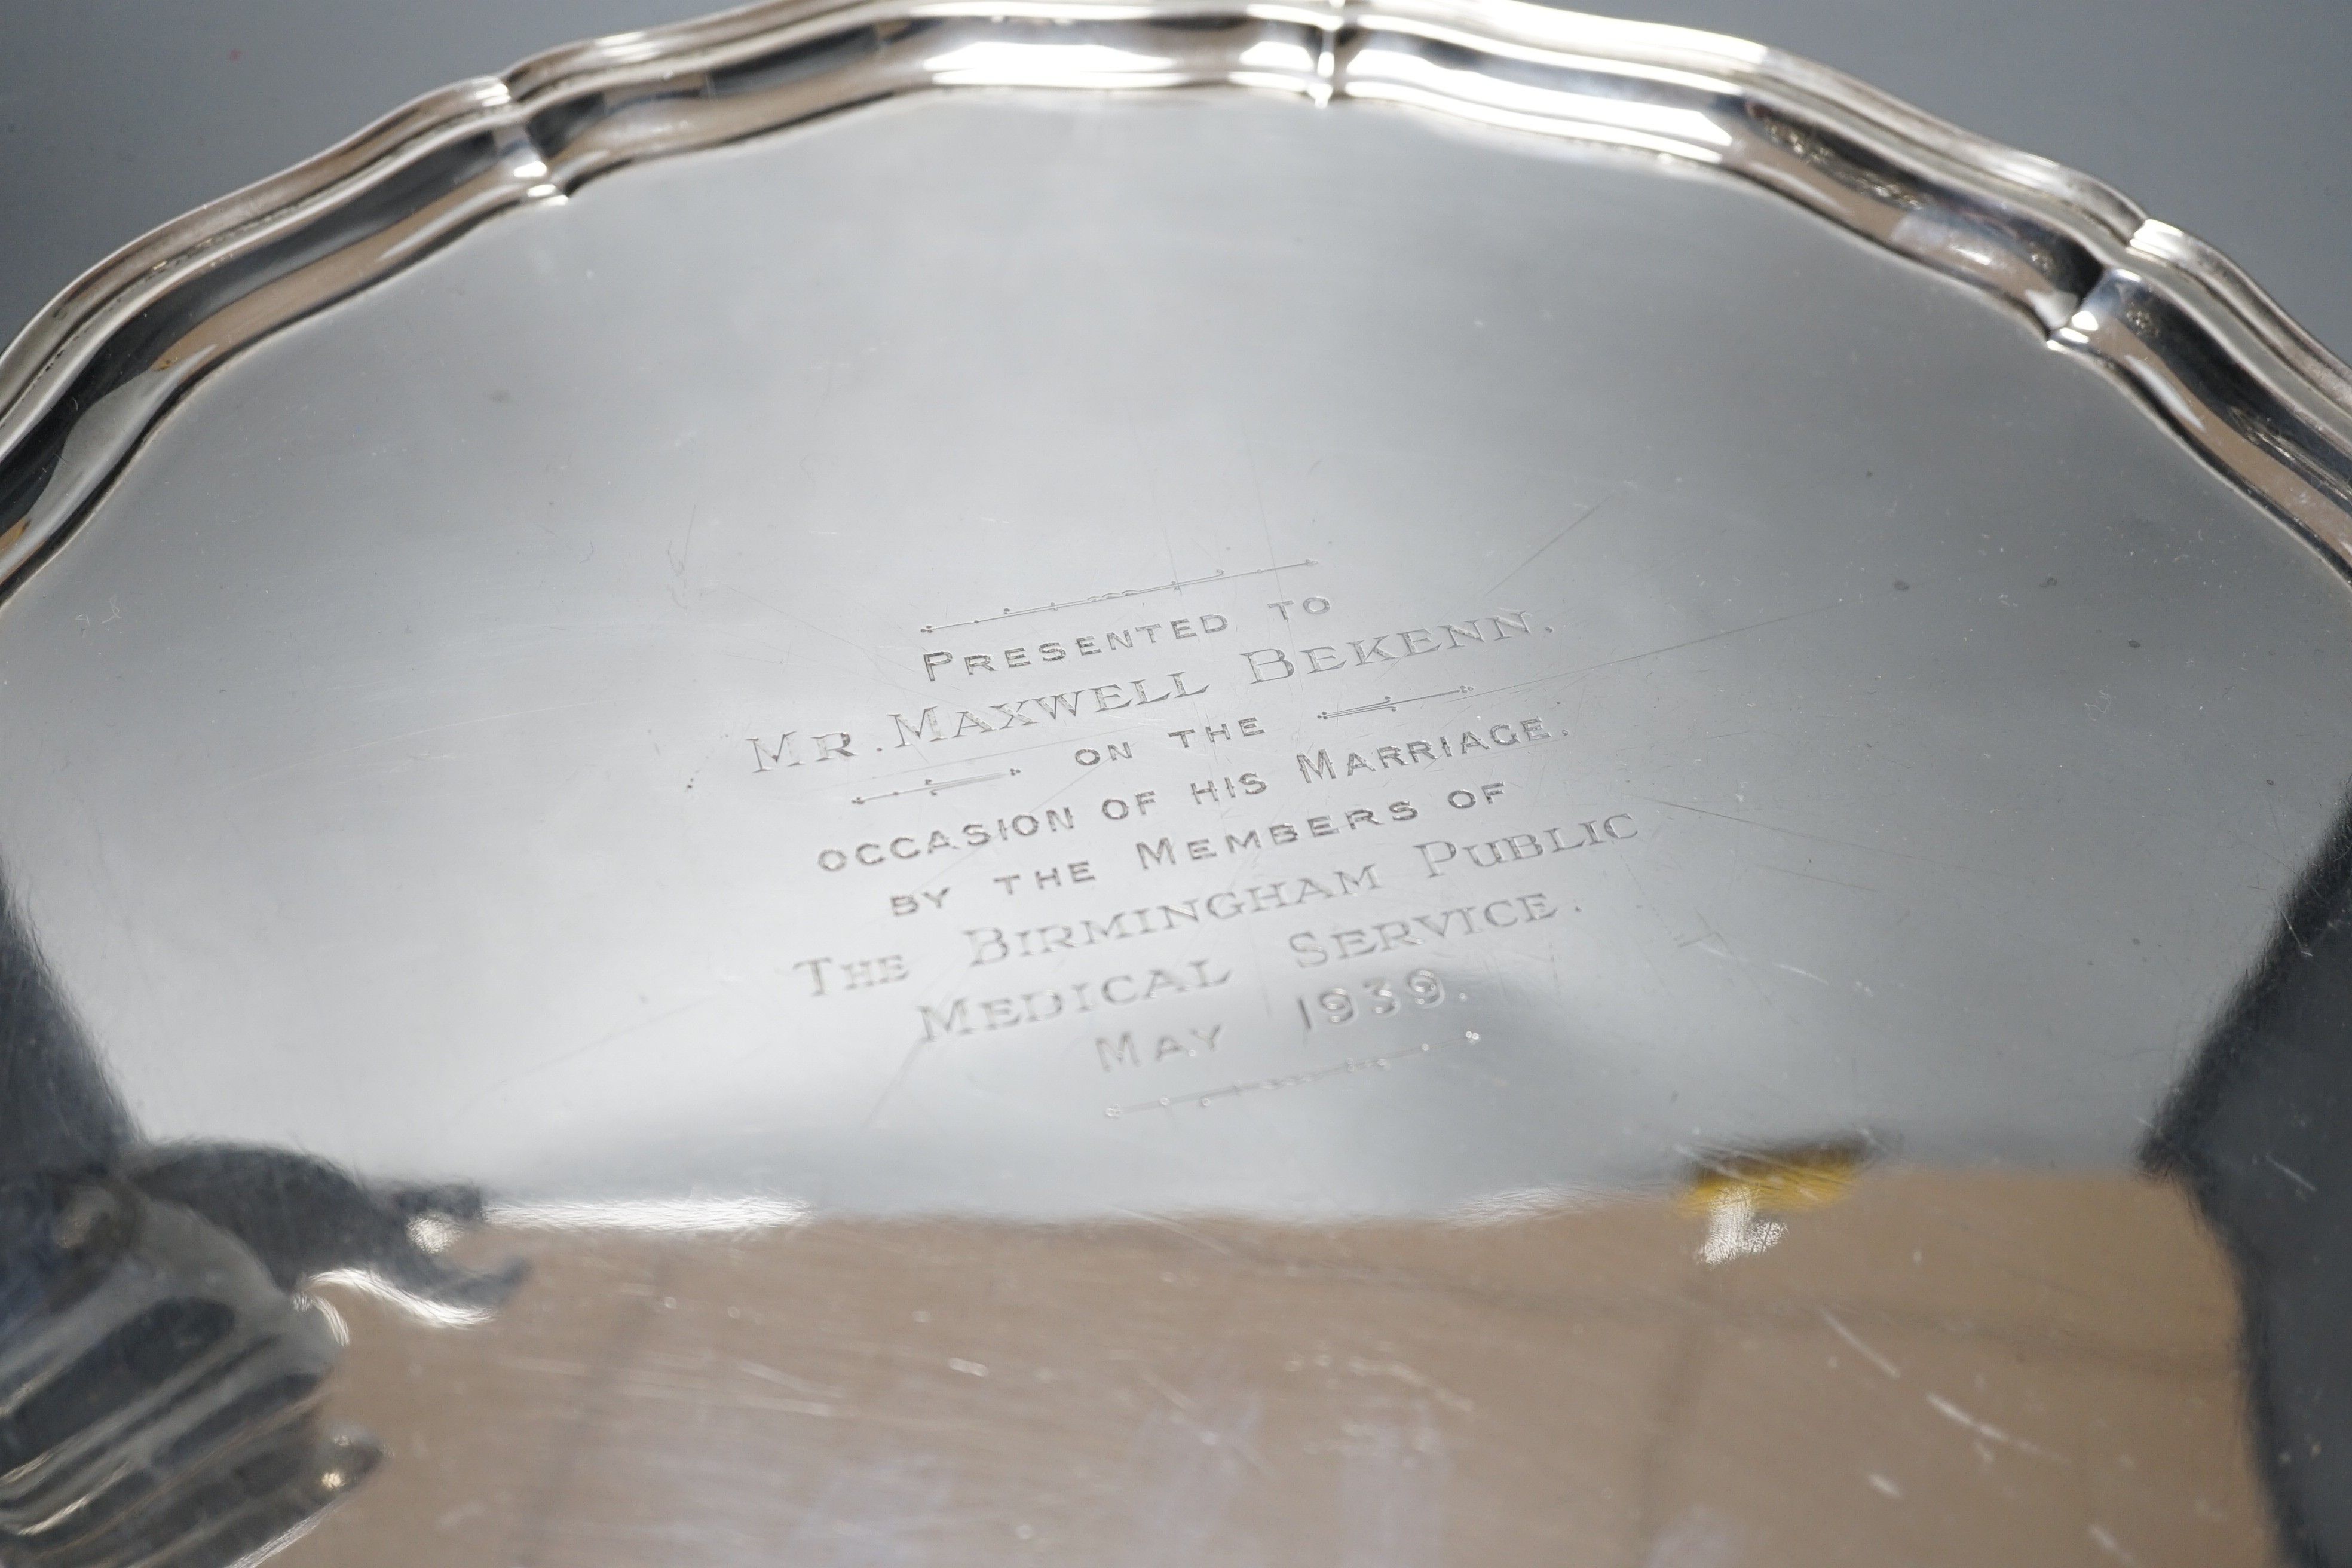 A George VI silver three piece tea set and circular tray, S. Blanckensee & Son Ltd, Chester, 1937/1938, the tray with engraved presentation inscription